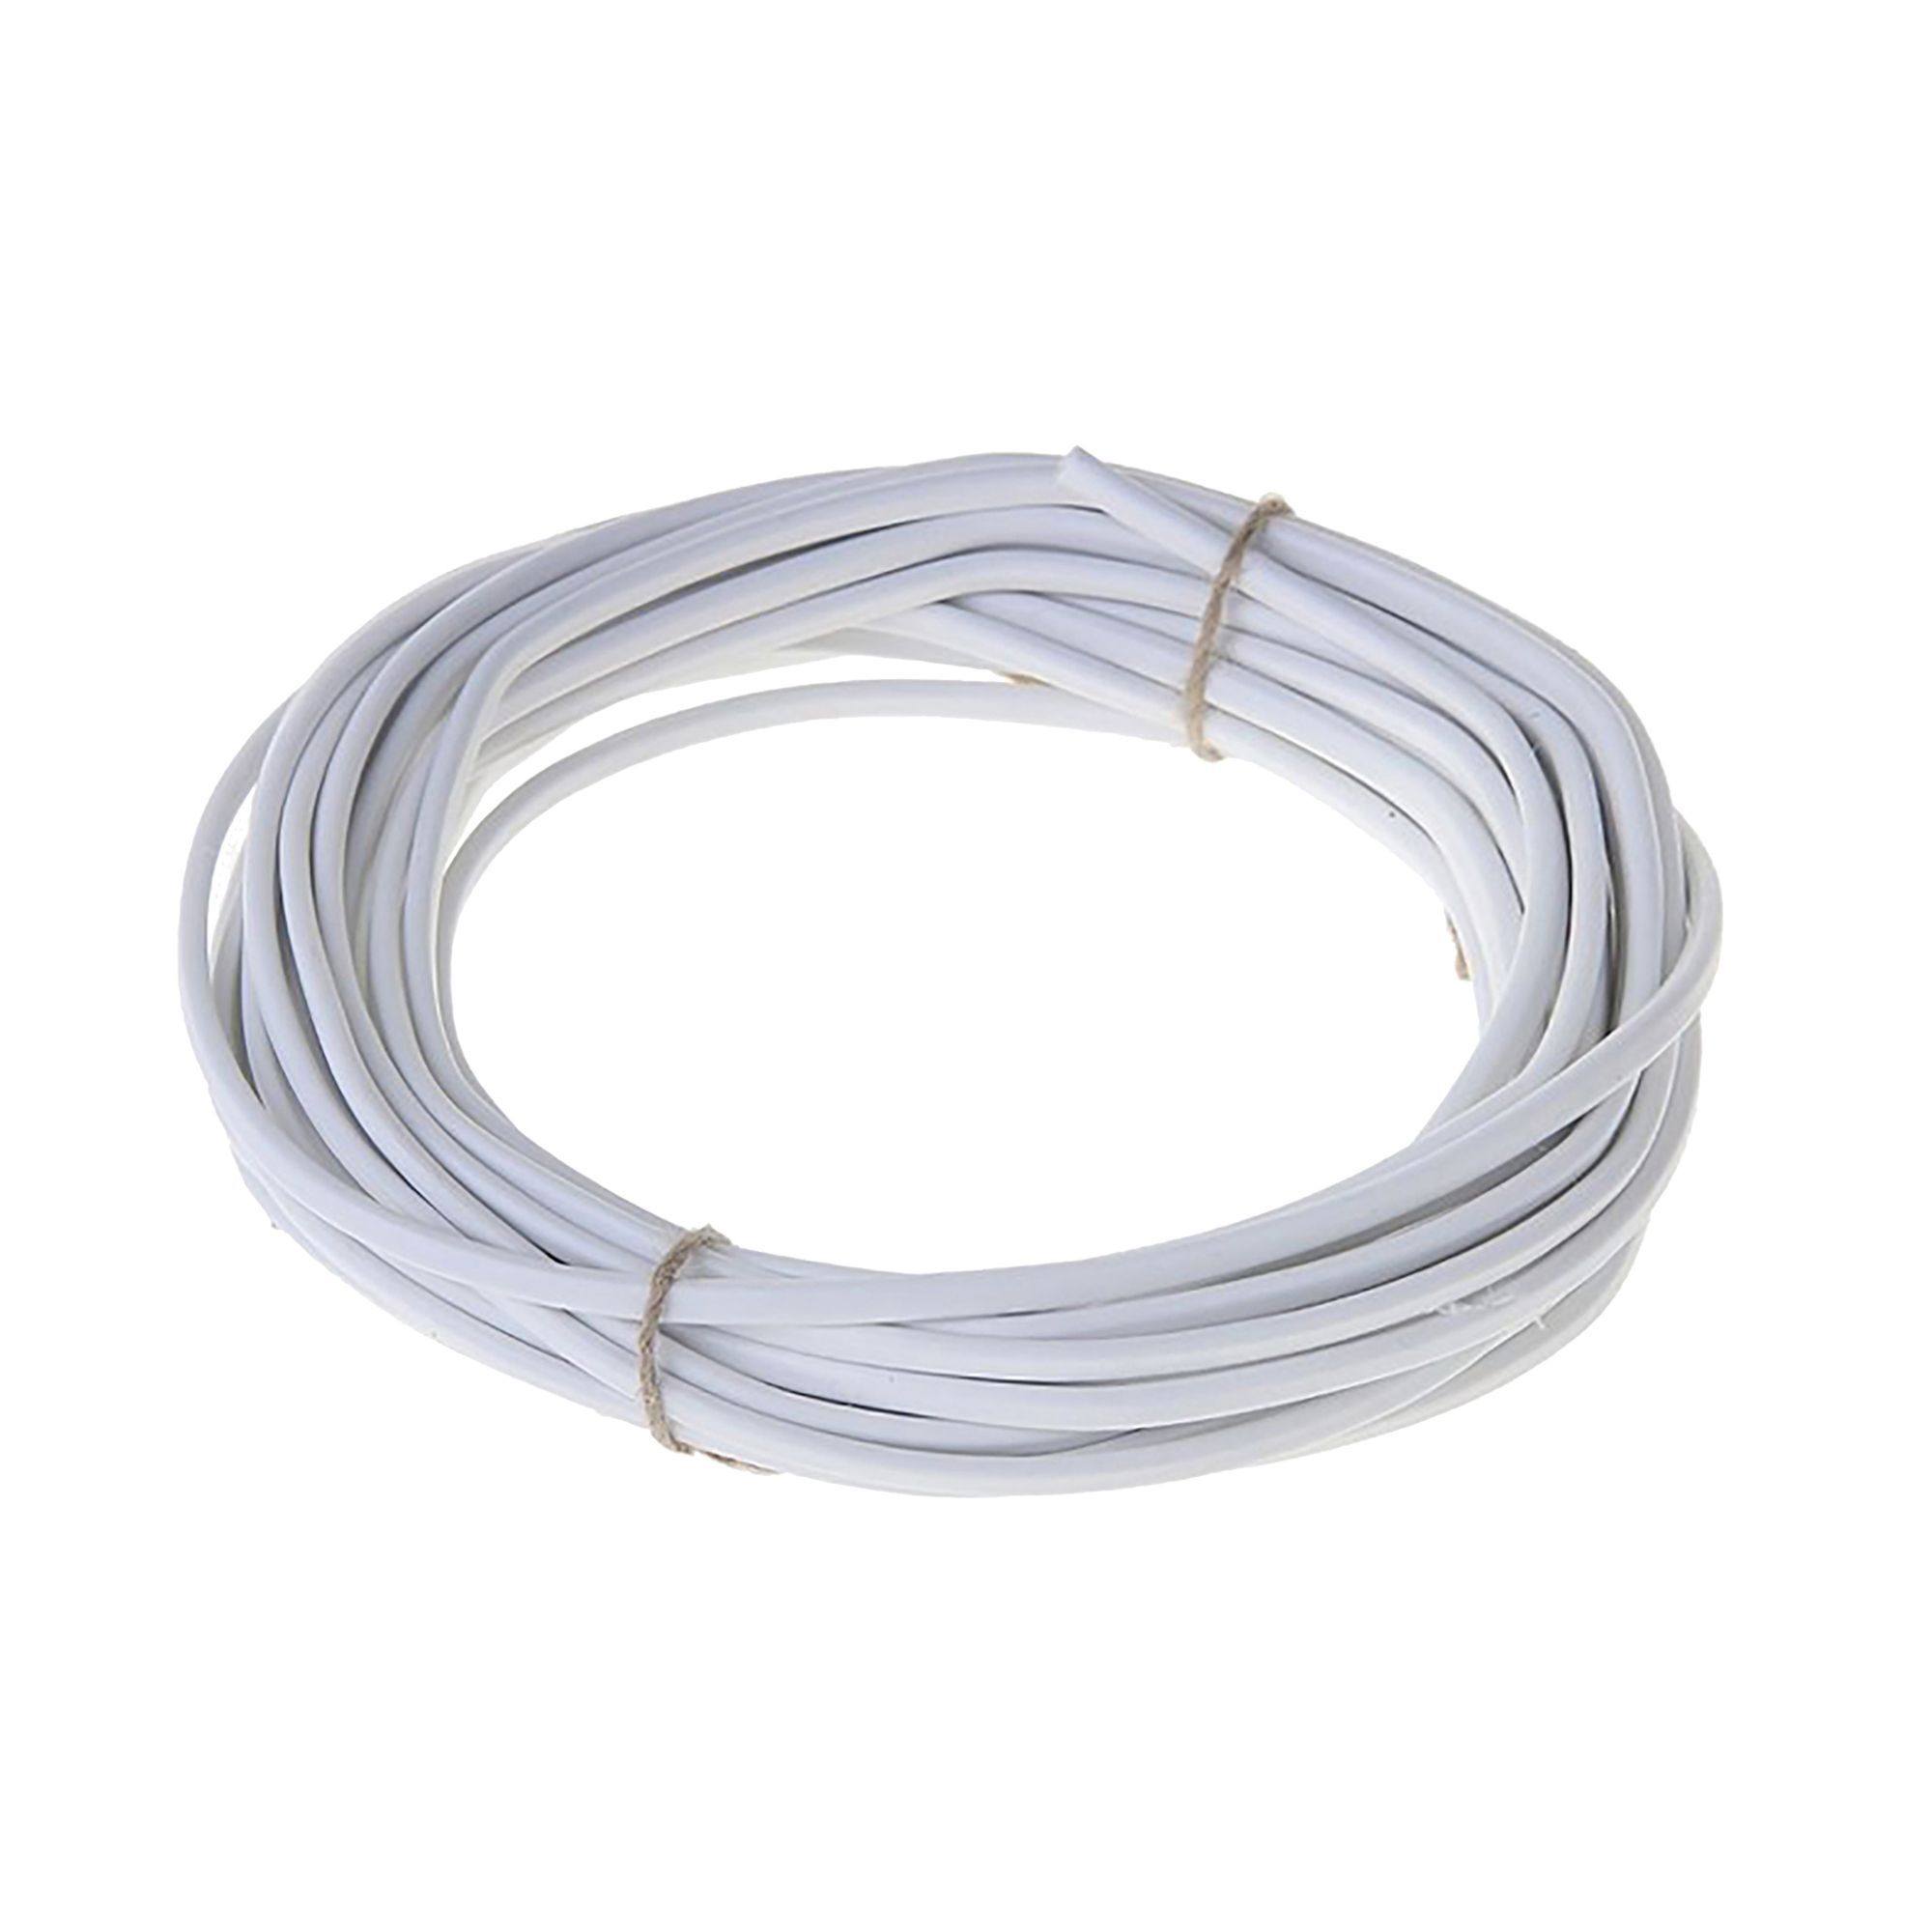 Time White 2-core Flexible Cable 0.75mm² x 10m